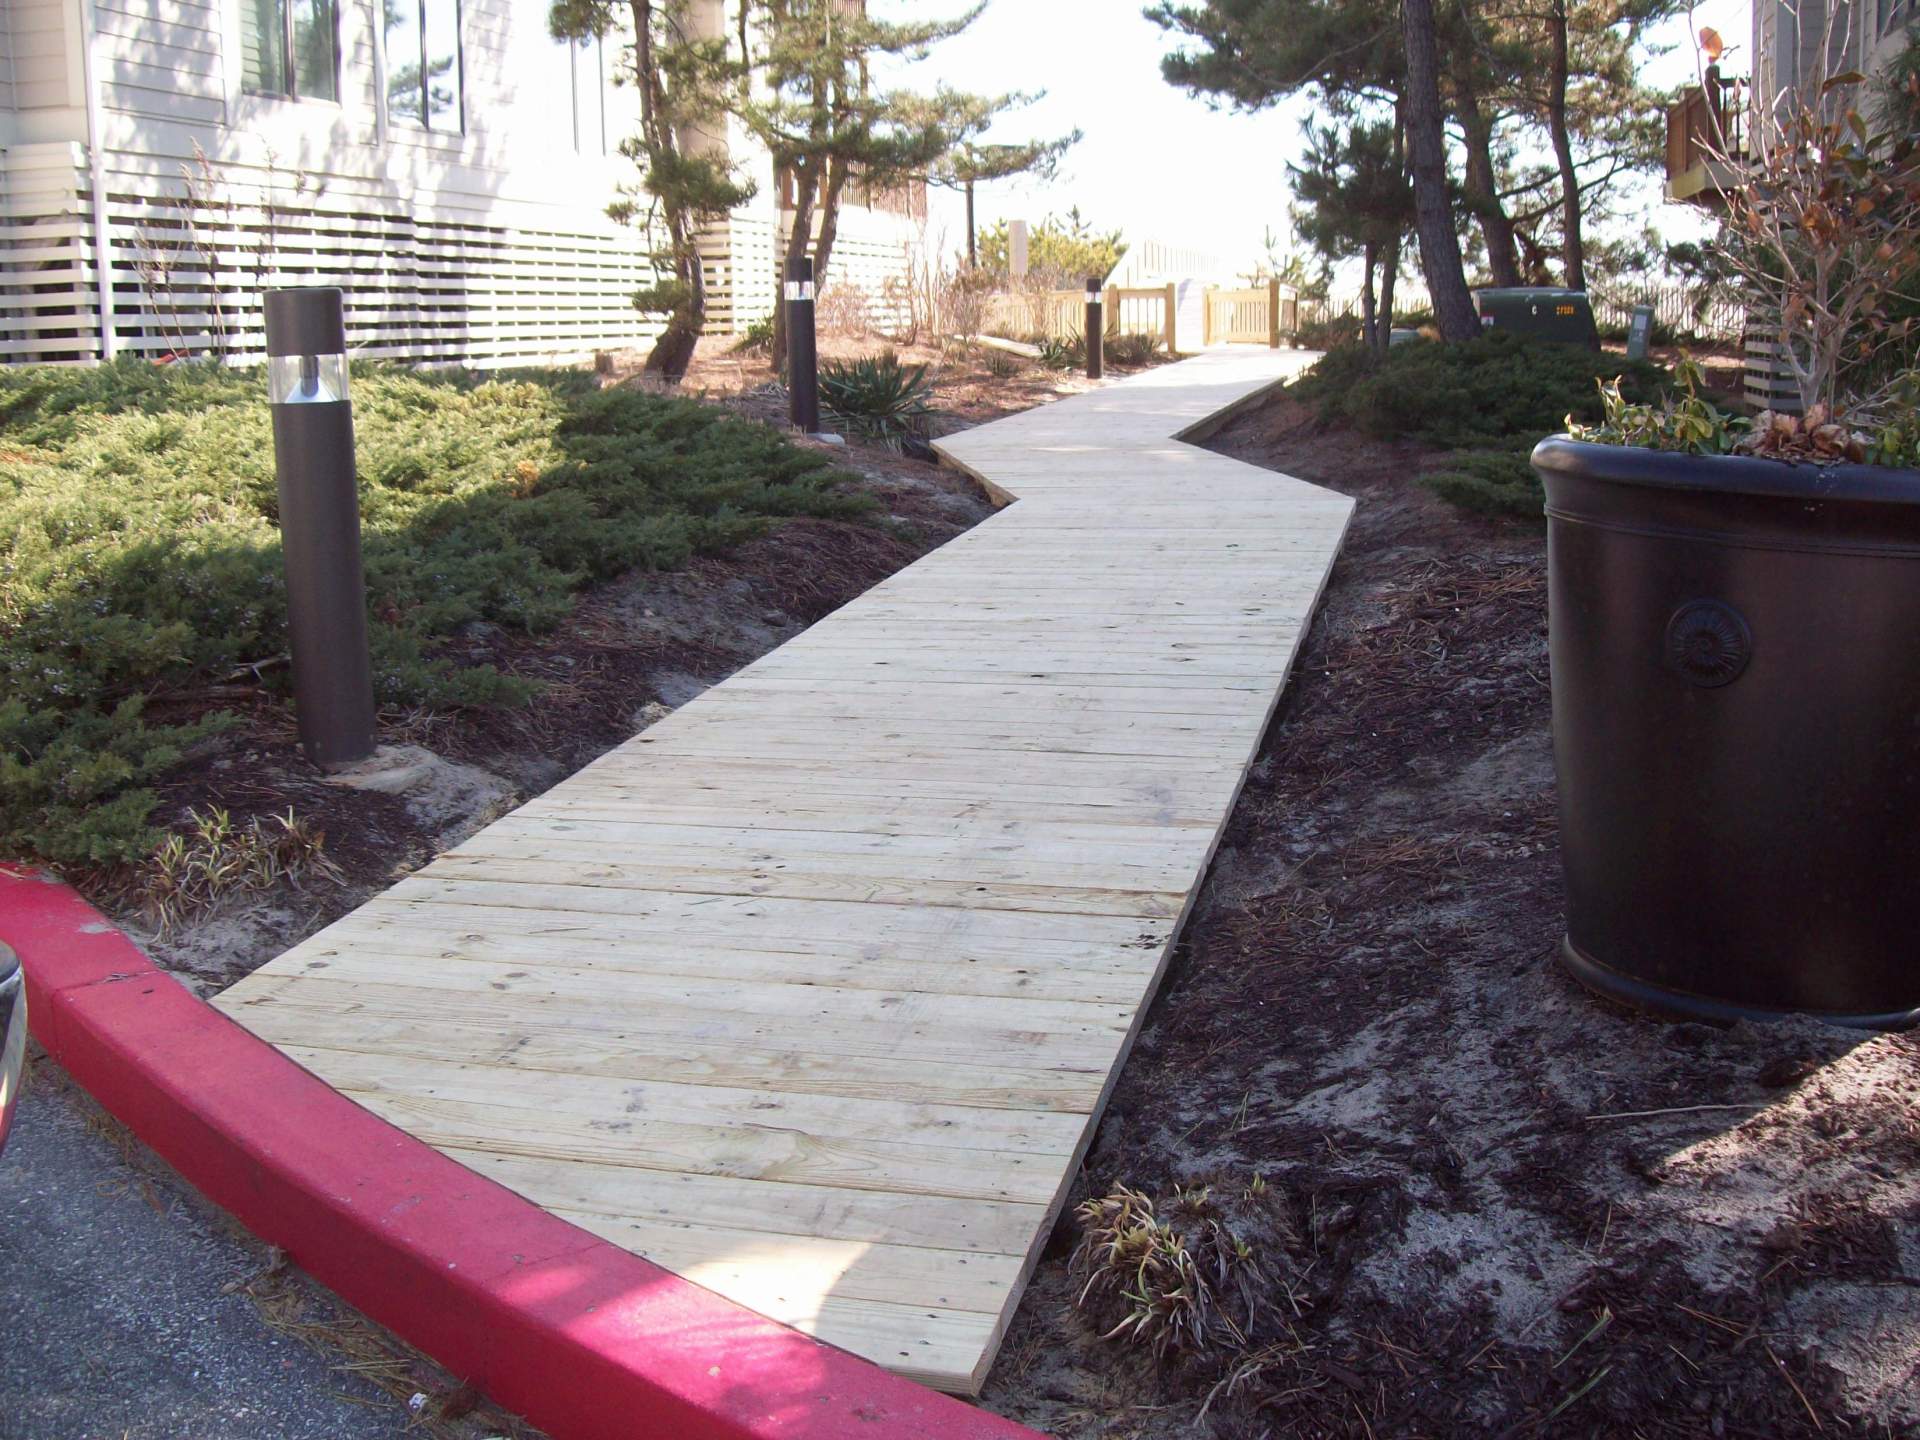 King's Grant curbside beach walkway leading to shower area